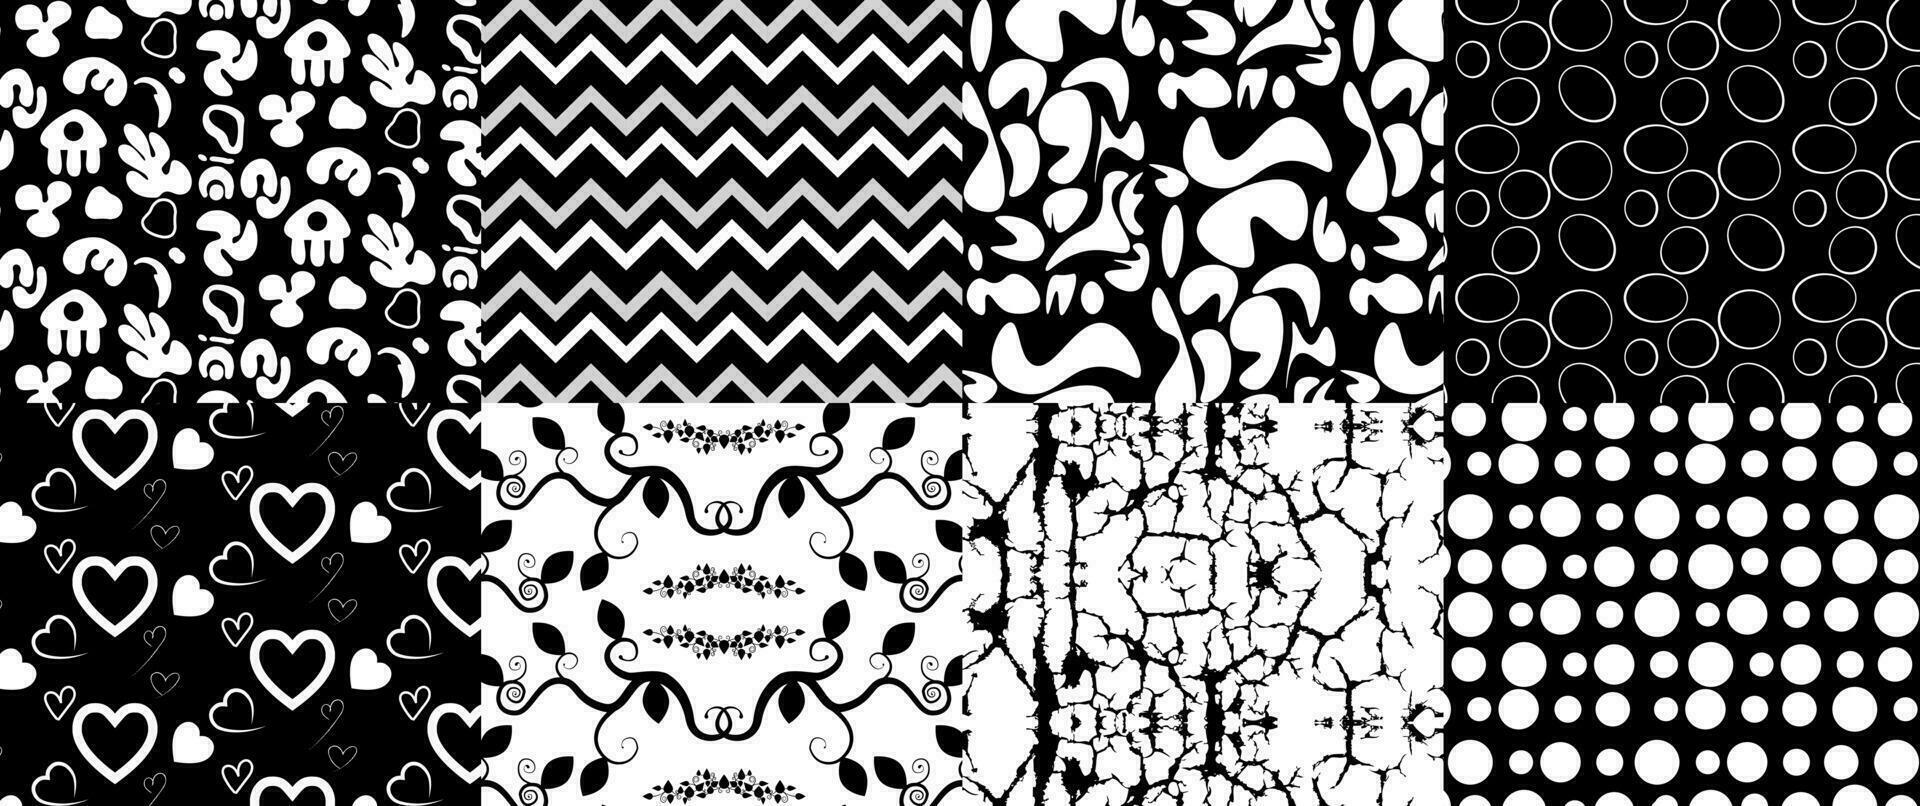 Collection of Geometric And Organic Background - Seamless Patterns - Vector Illustration - Black and White Patterns